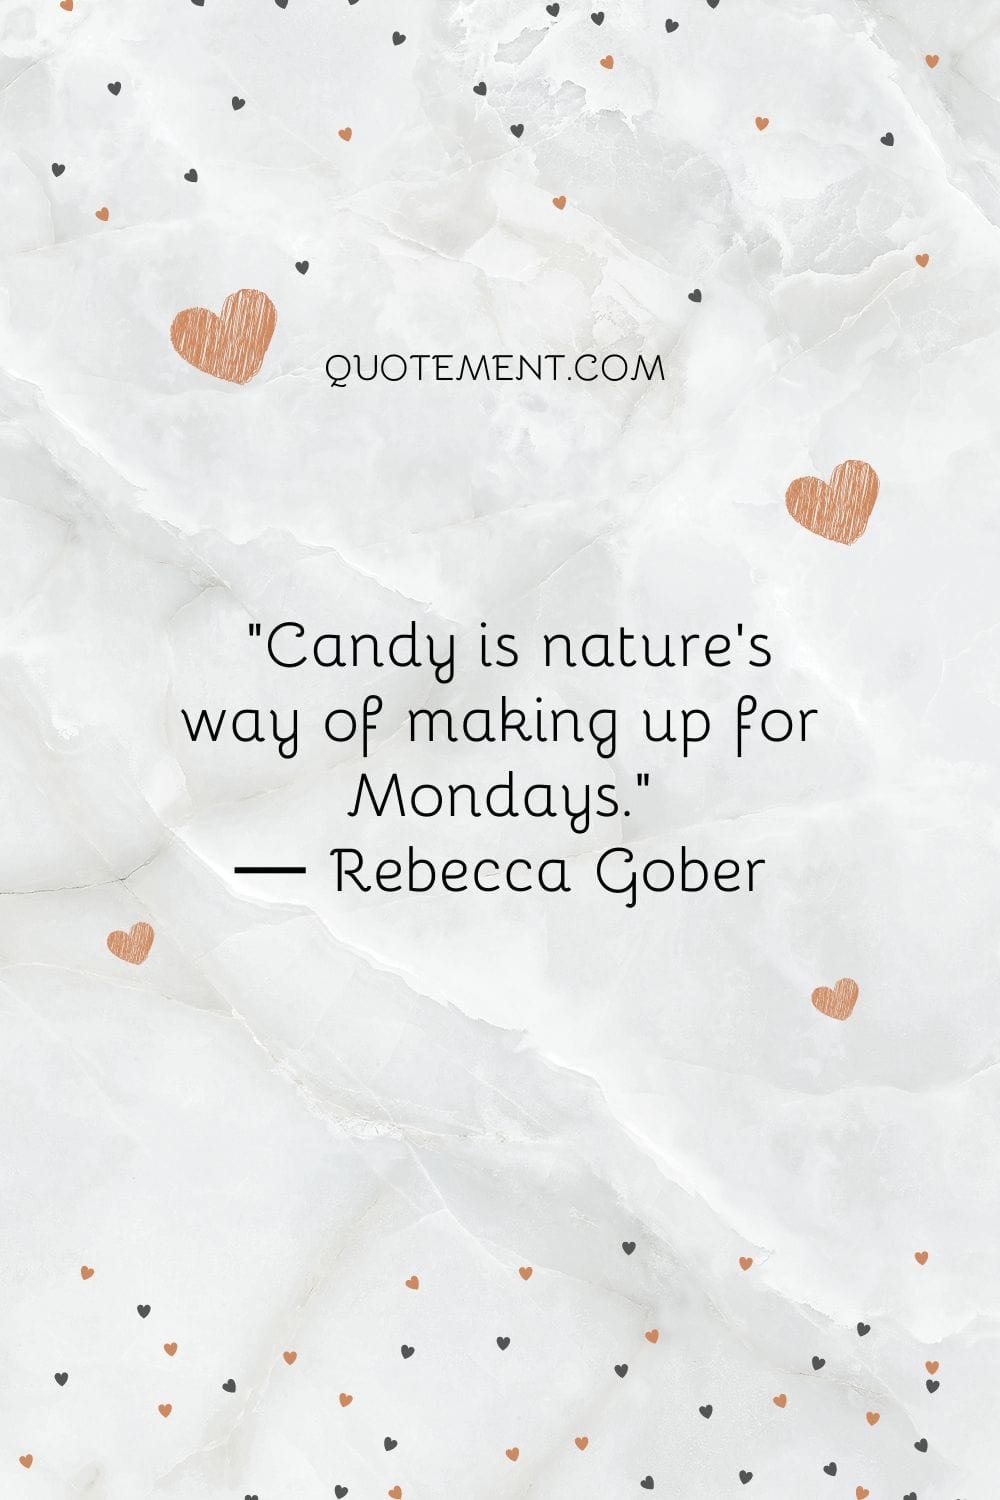 Candy is nature's way of making up for Mondays.